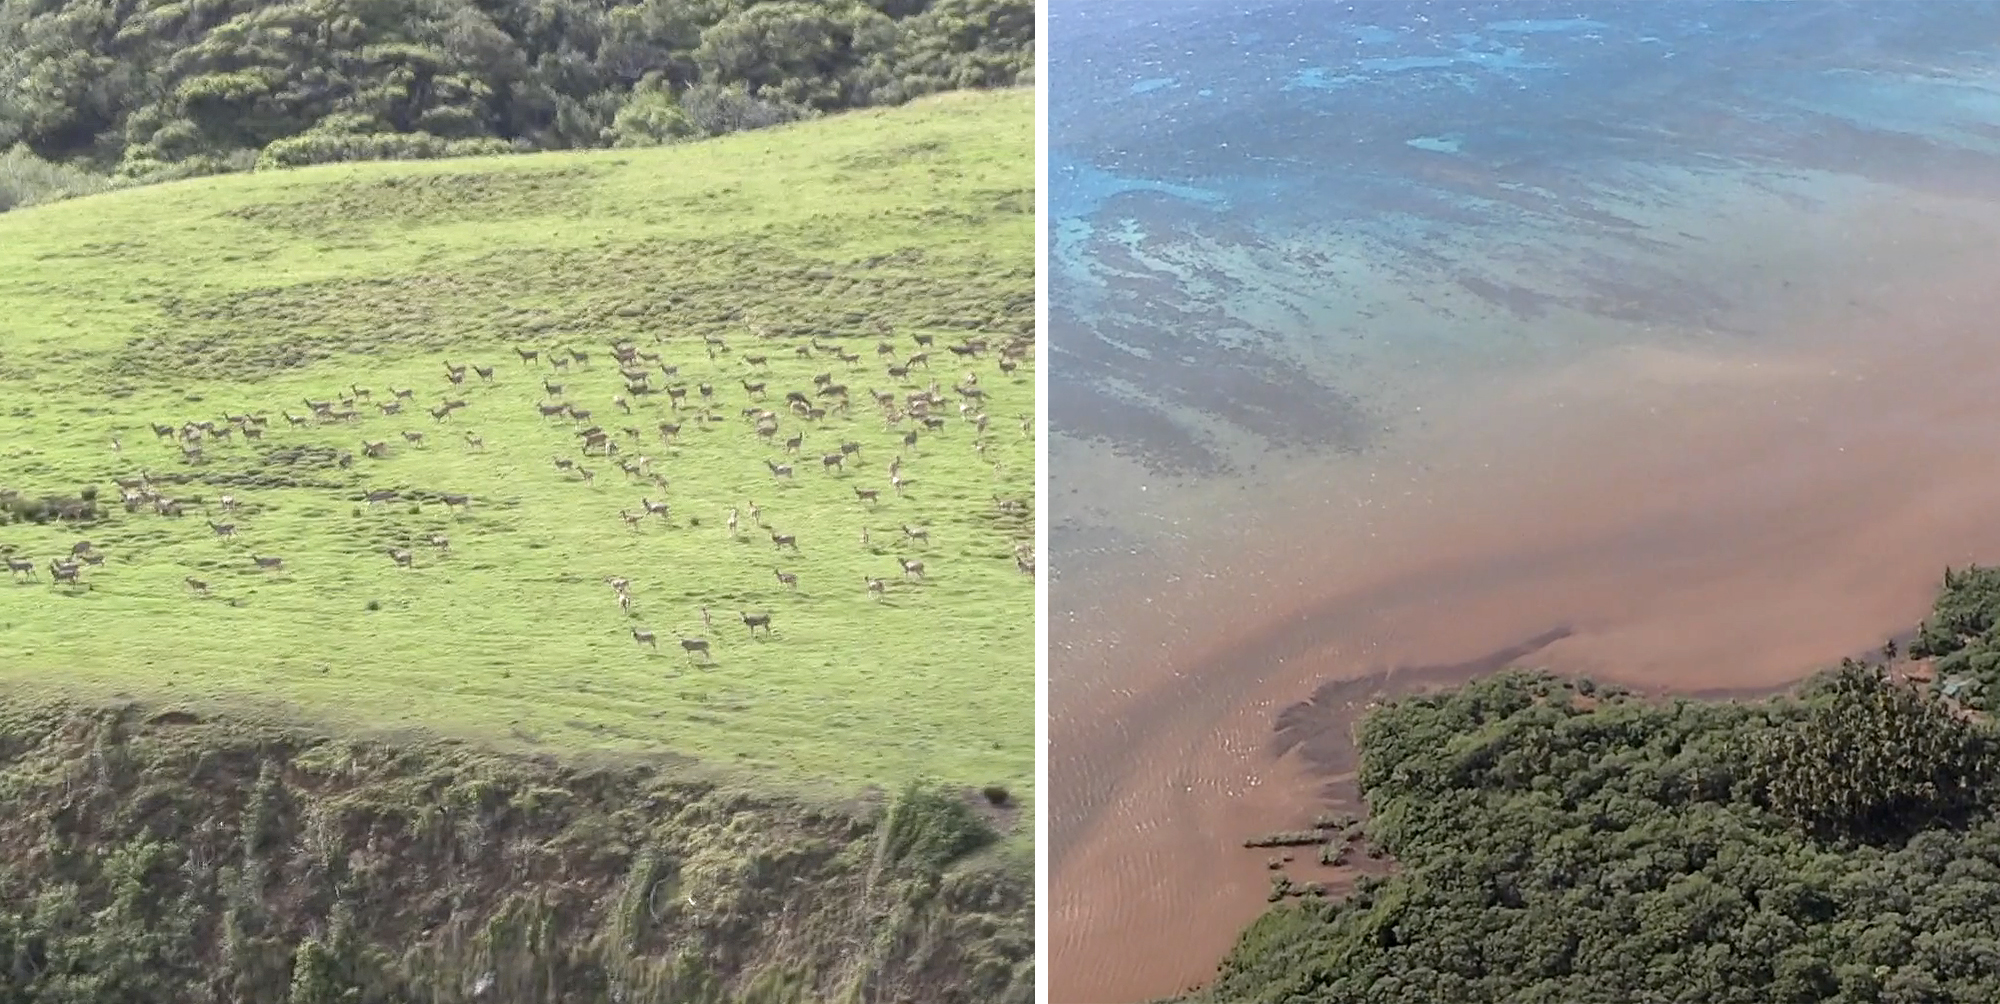 Axis deer in Hawaii are causing overbrowsing and erosion issues.